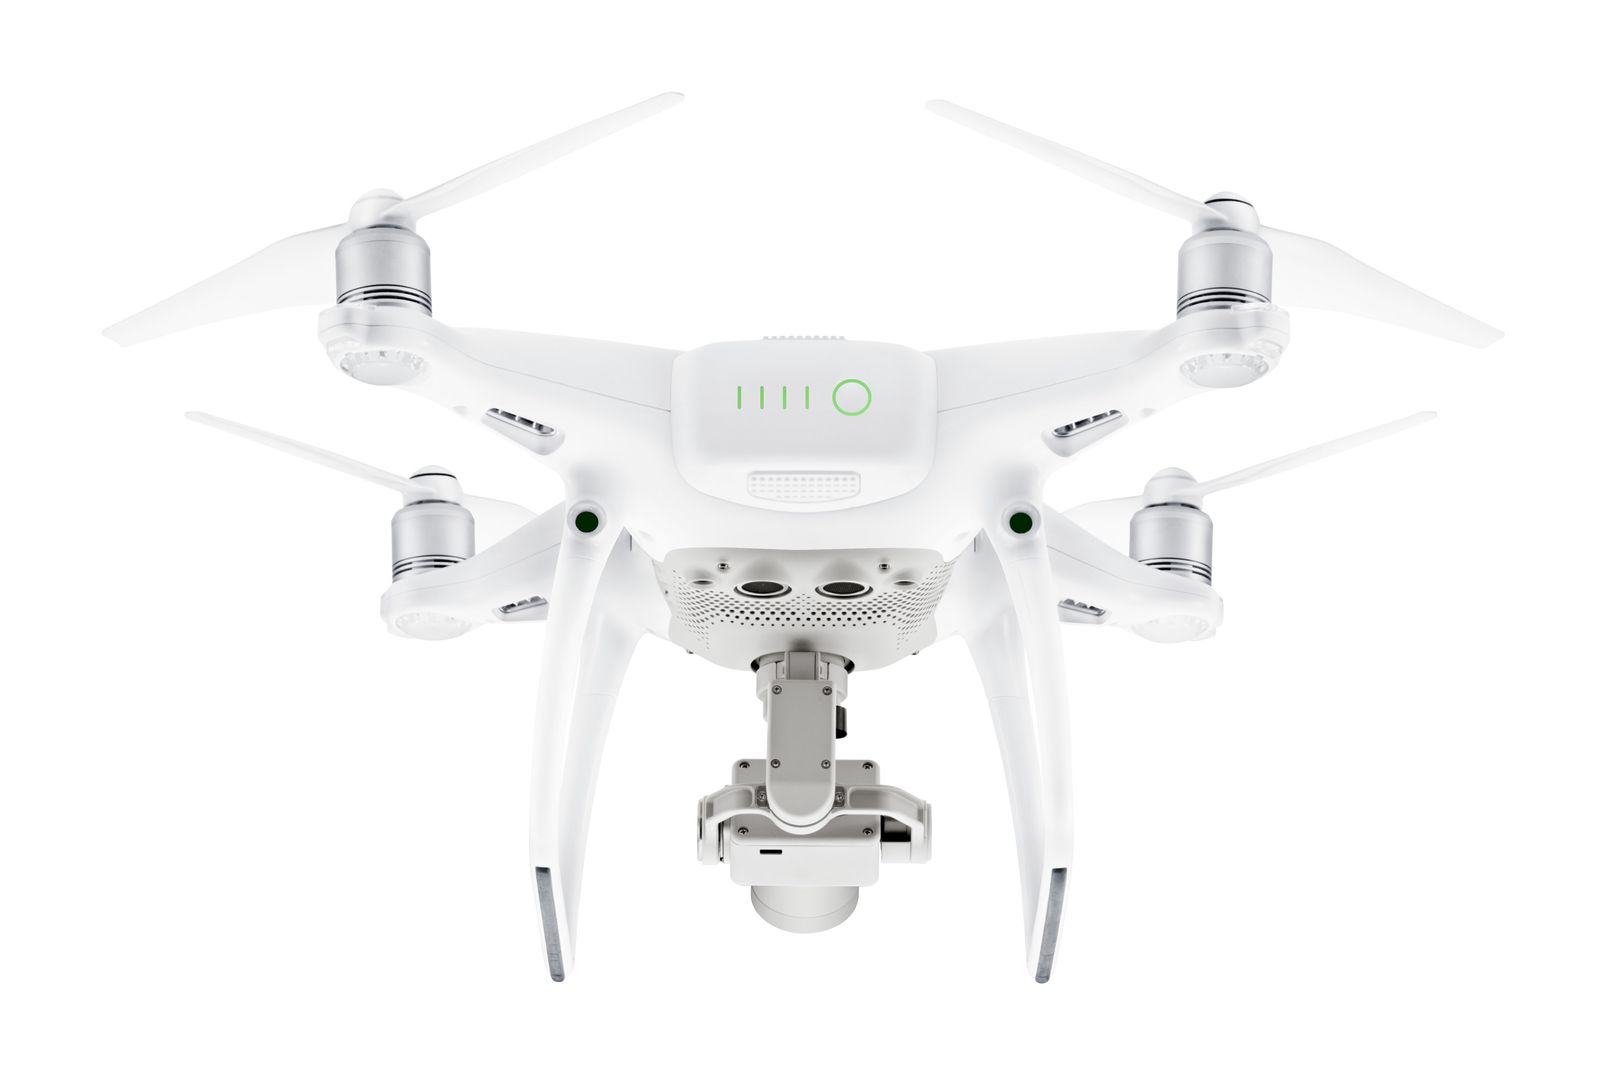 dji phantom 4 pro packs magnificent smarts in a flying machine image 2